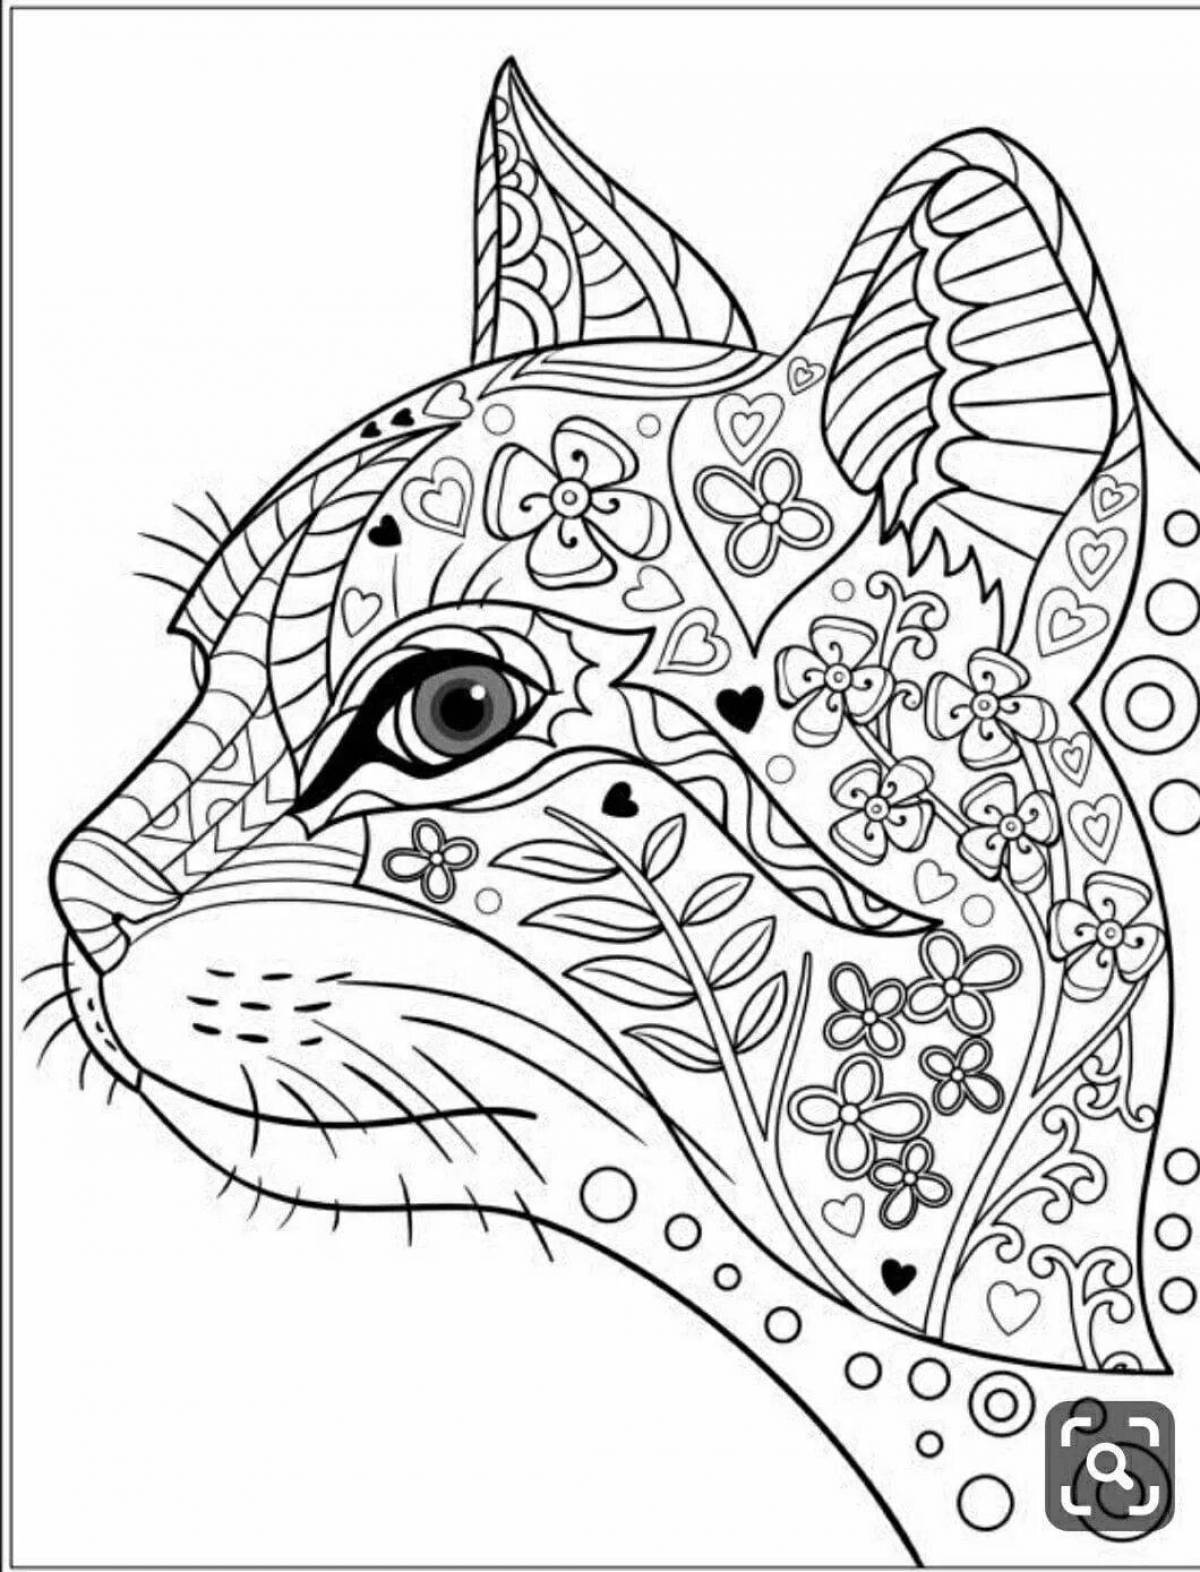 Fun coloring book for adult lungs